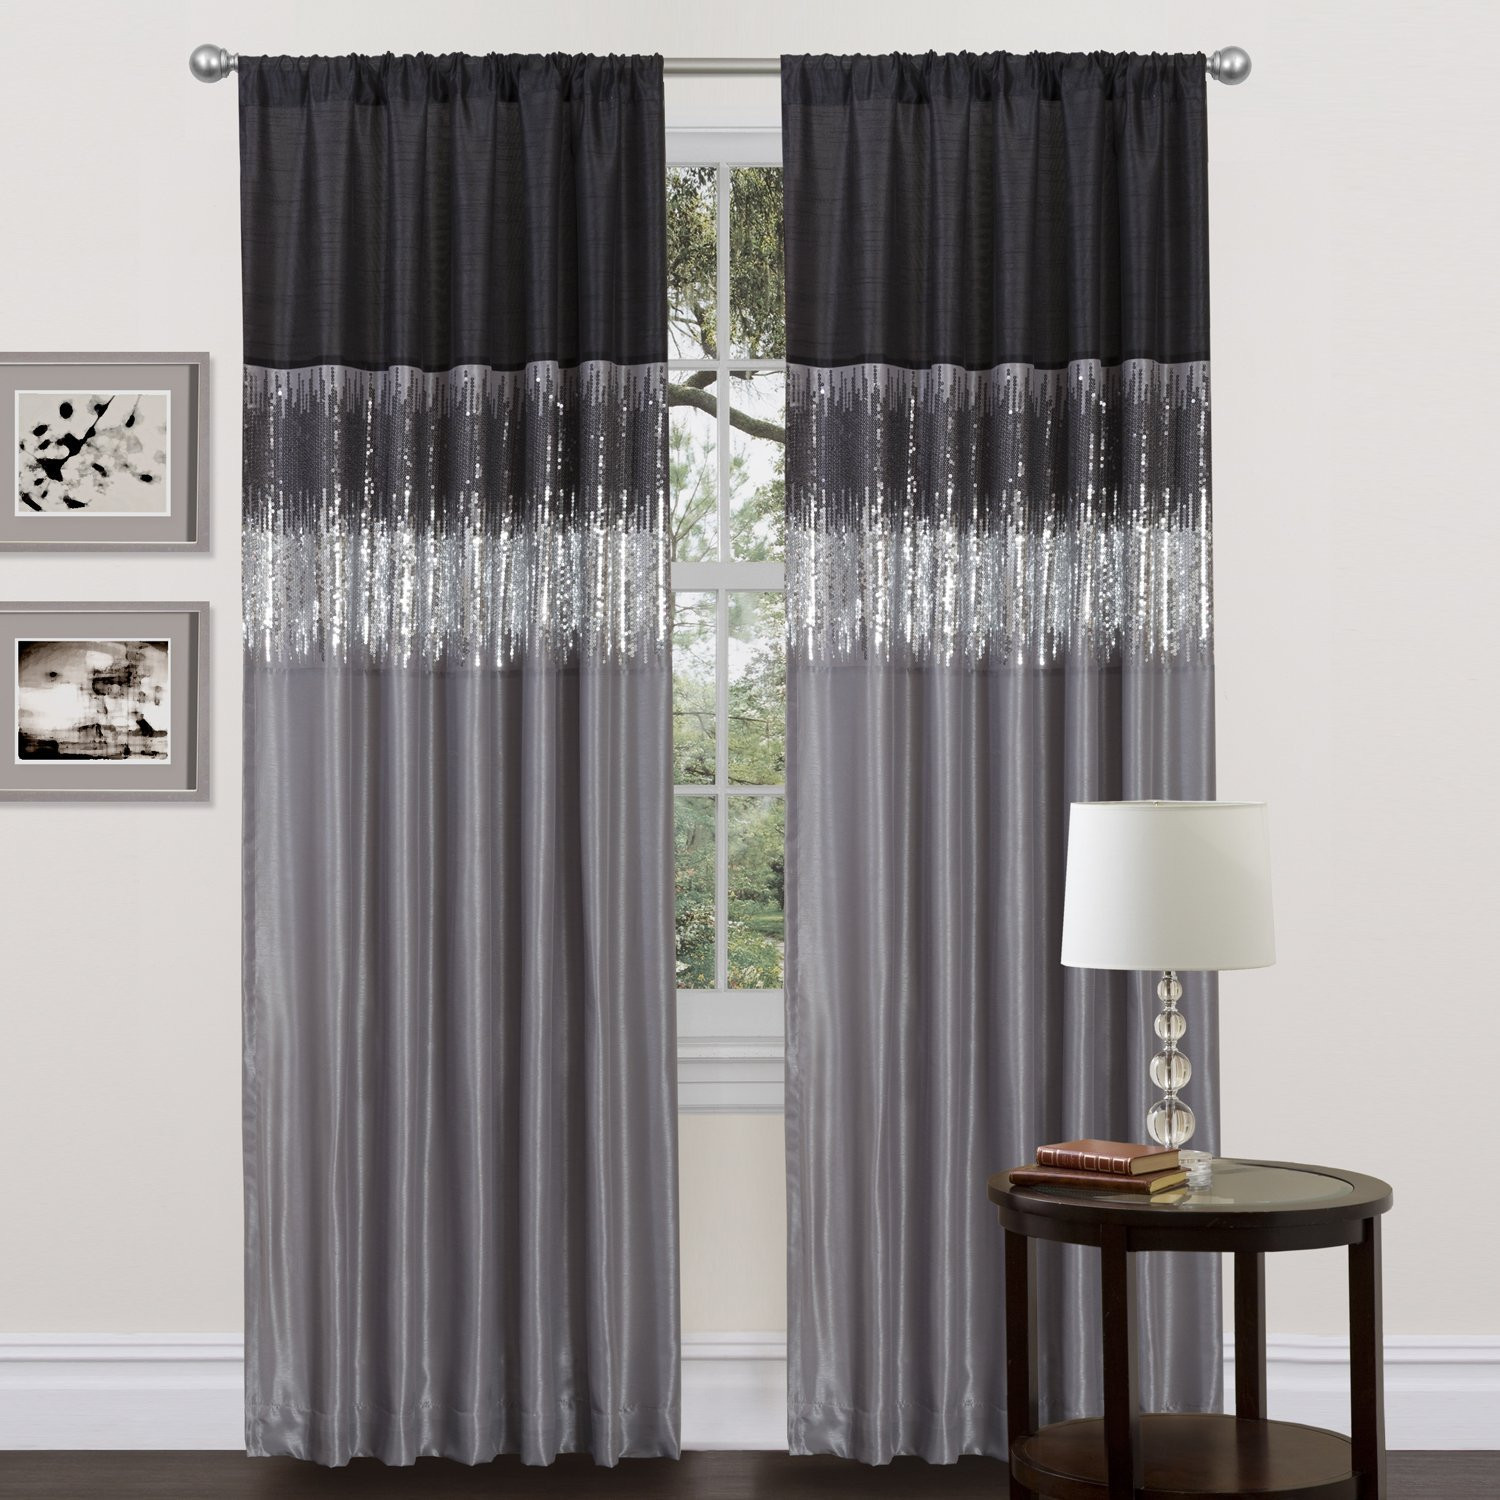 Target Living Room Curtains
 Decorations Door And Windows Decorating Ideas With Tar